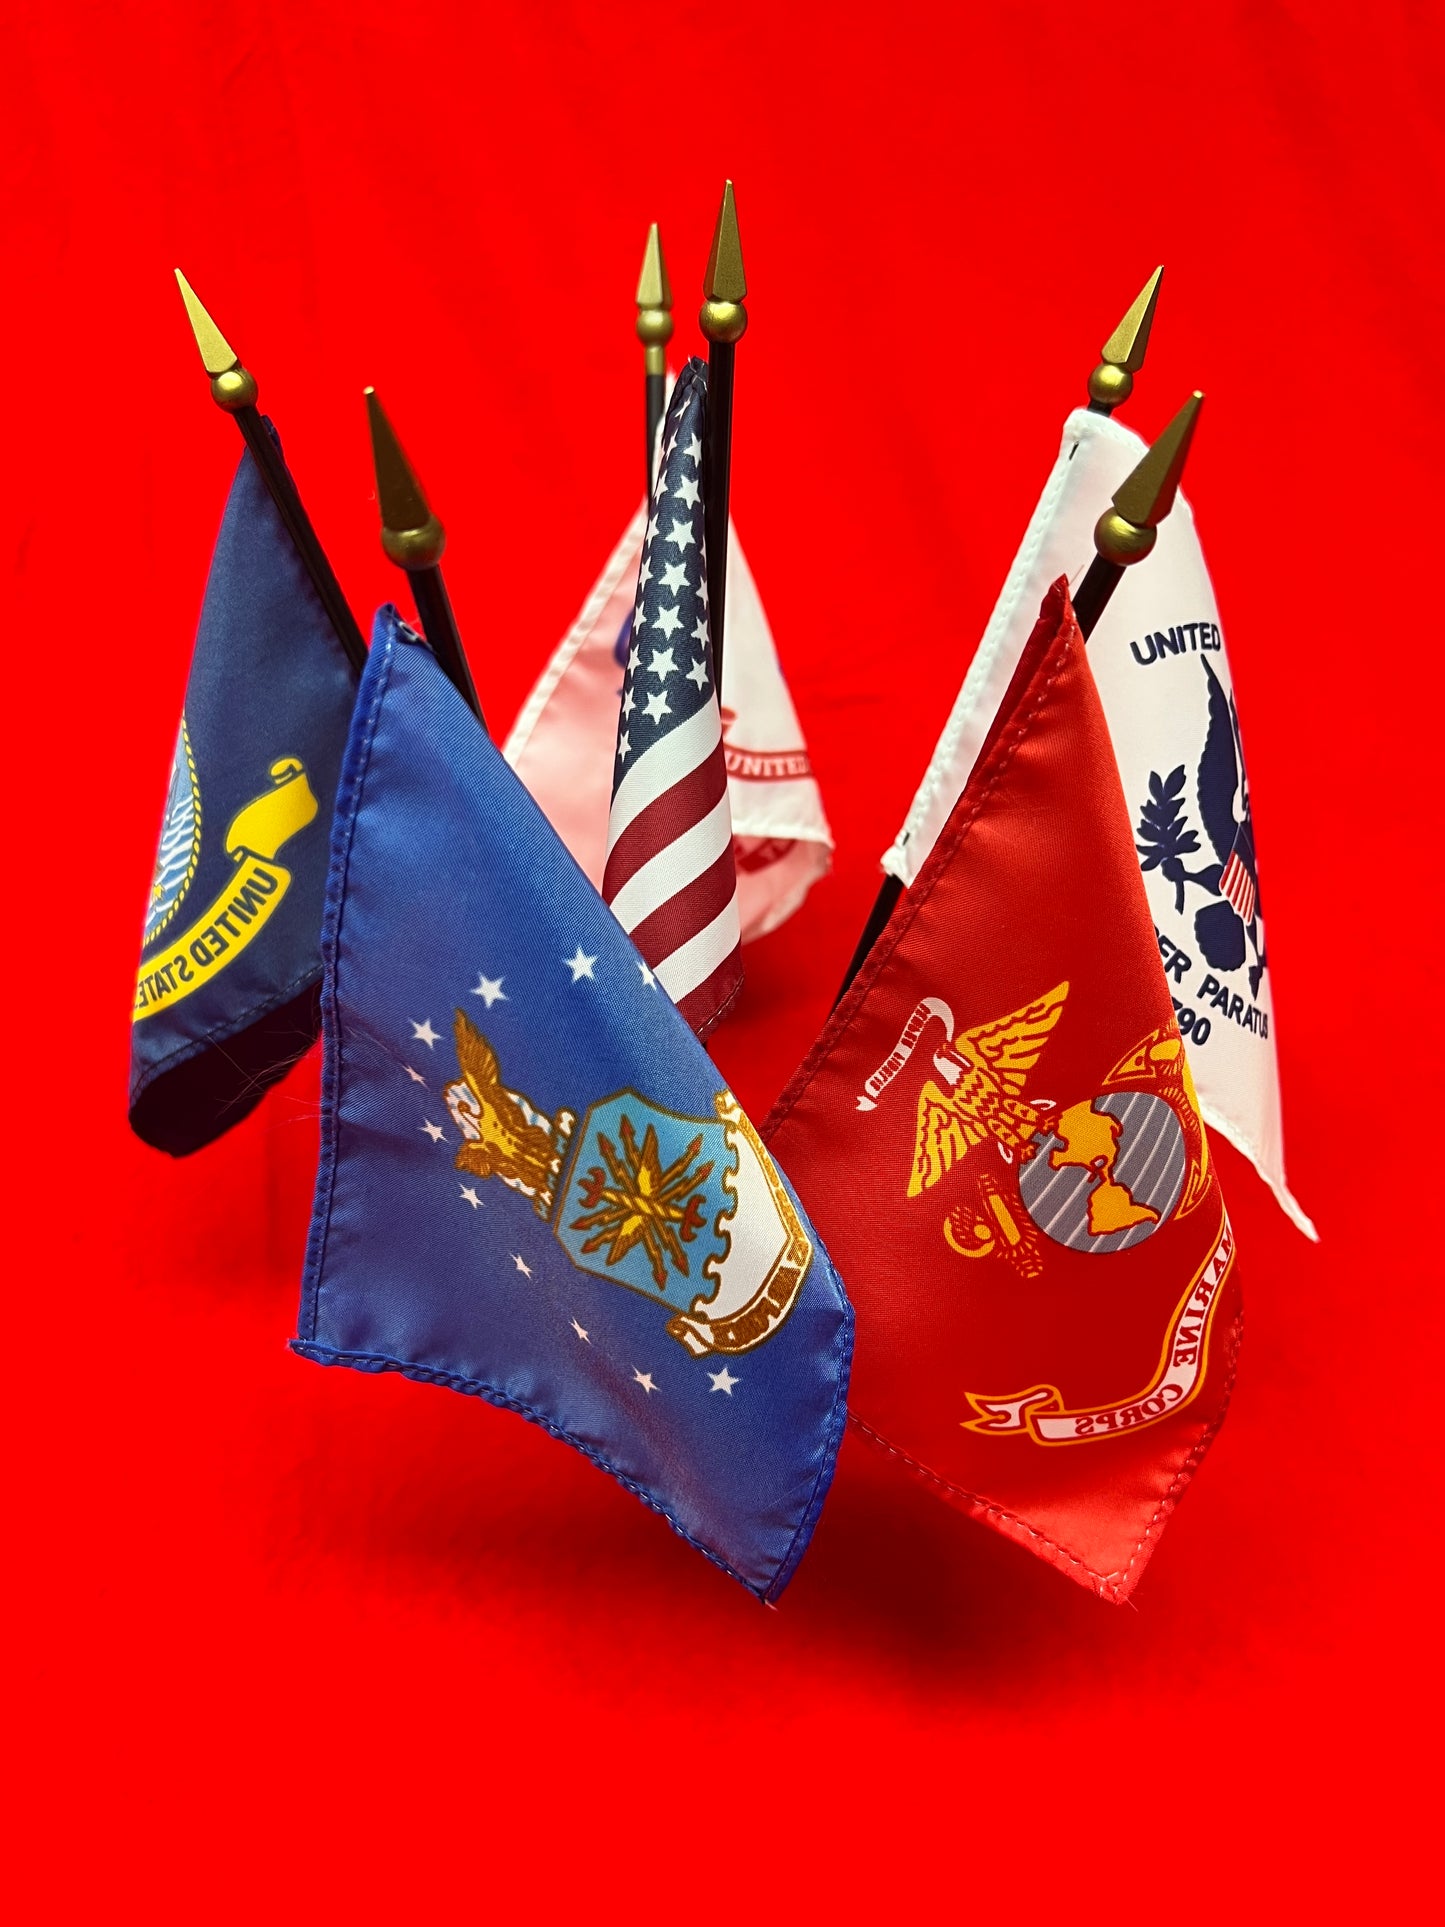 Armed Forces Set 4"x6" stick flags, 5 branch and US